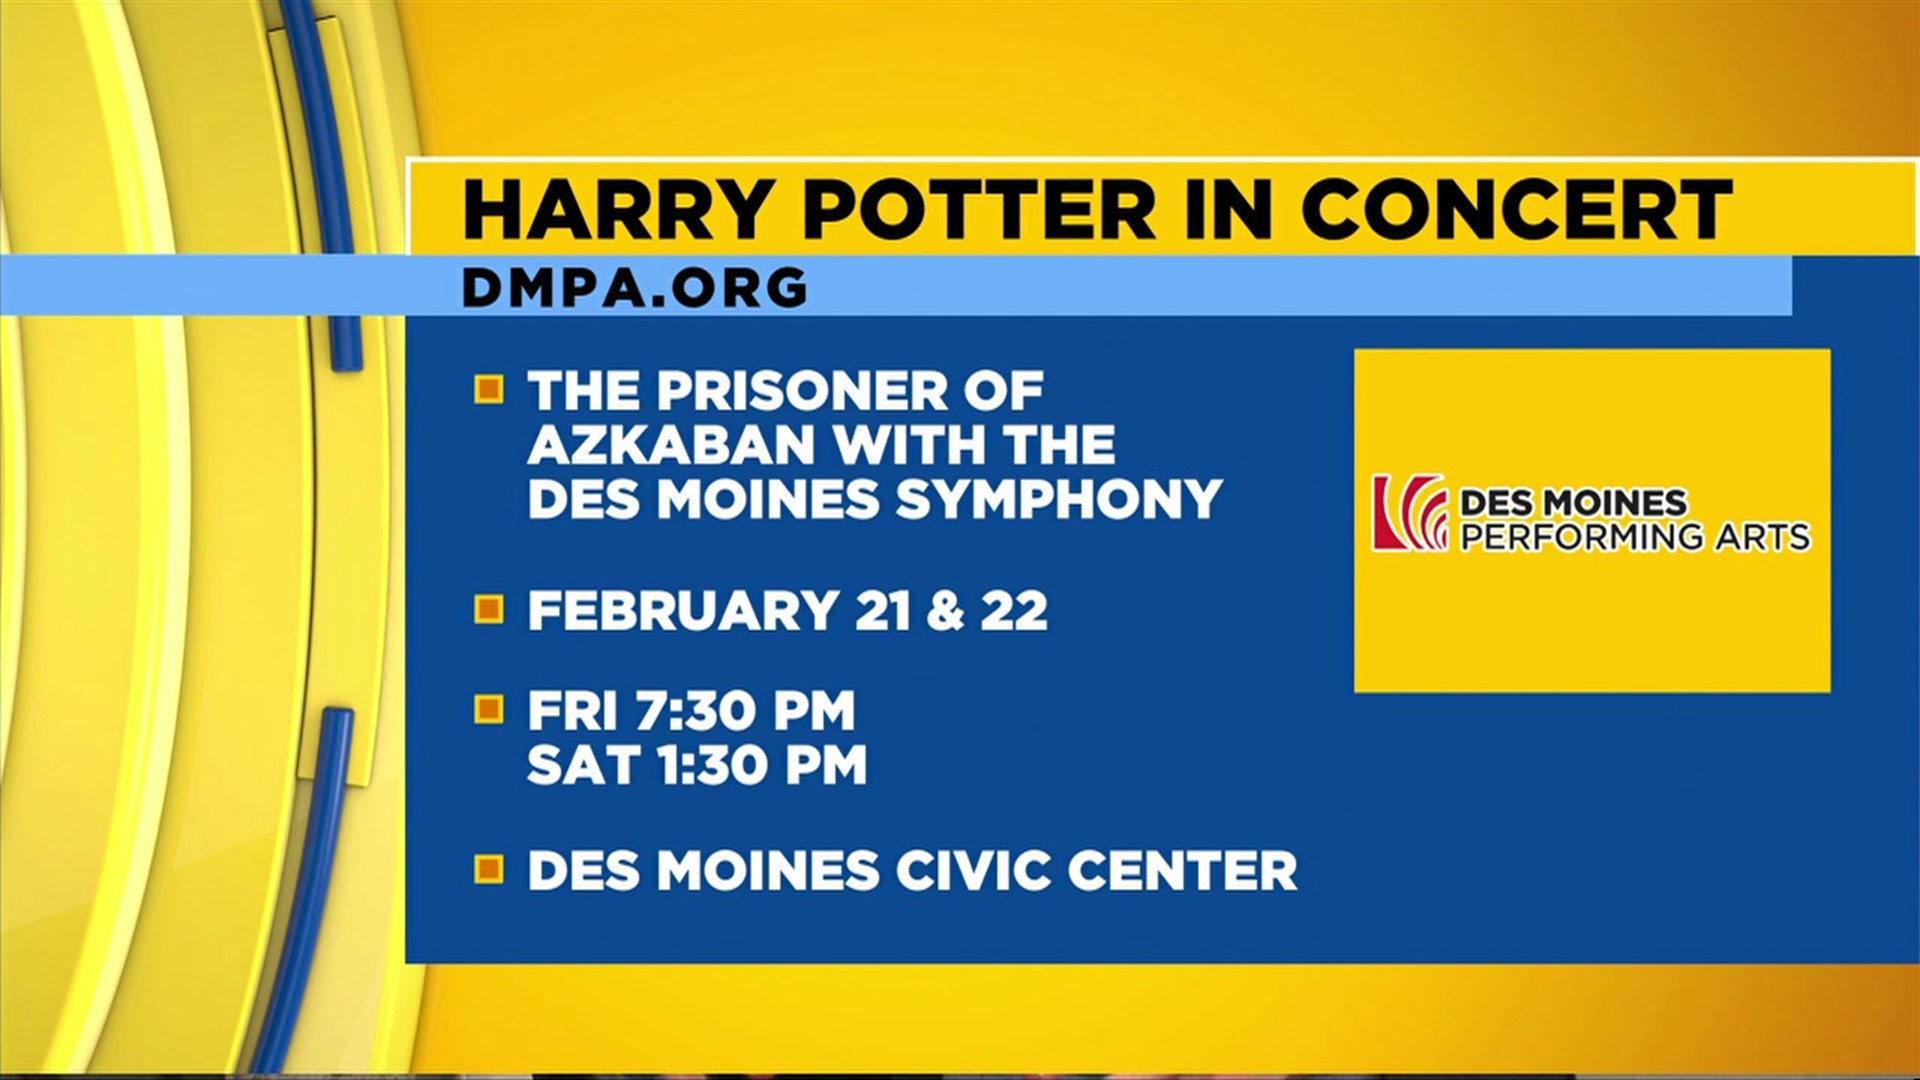 Upcoming events at the Des Moines Civic Center